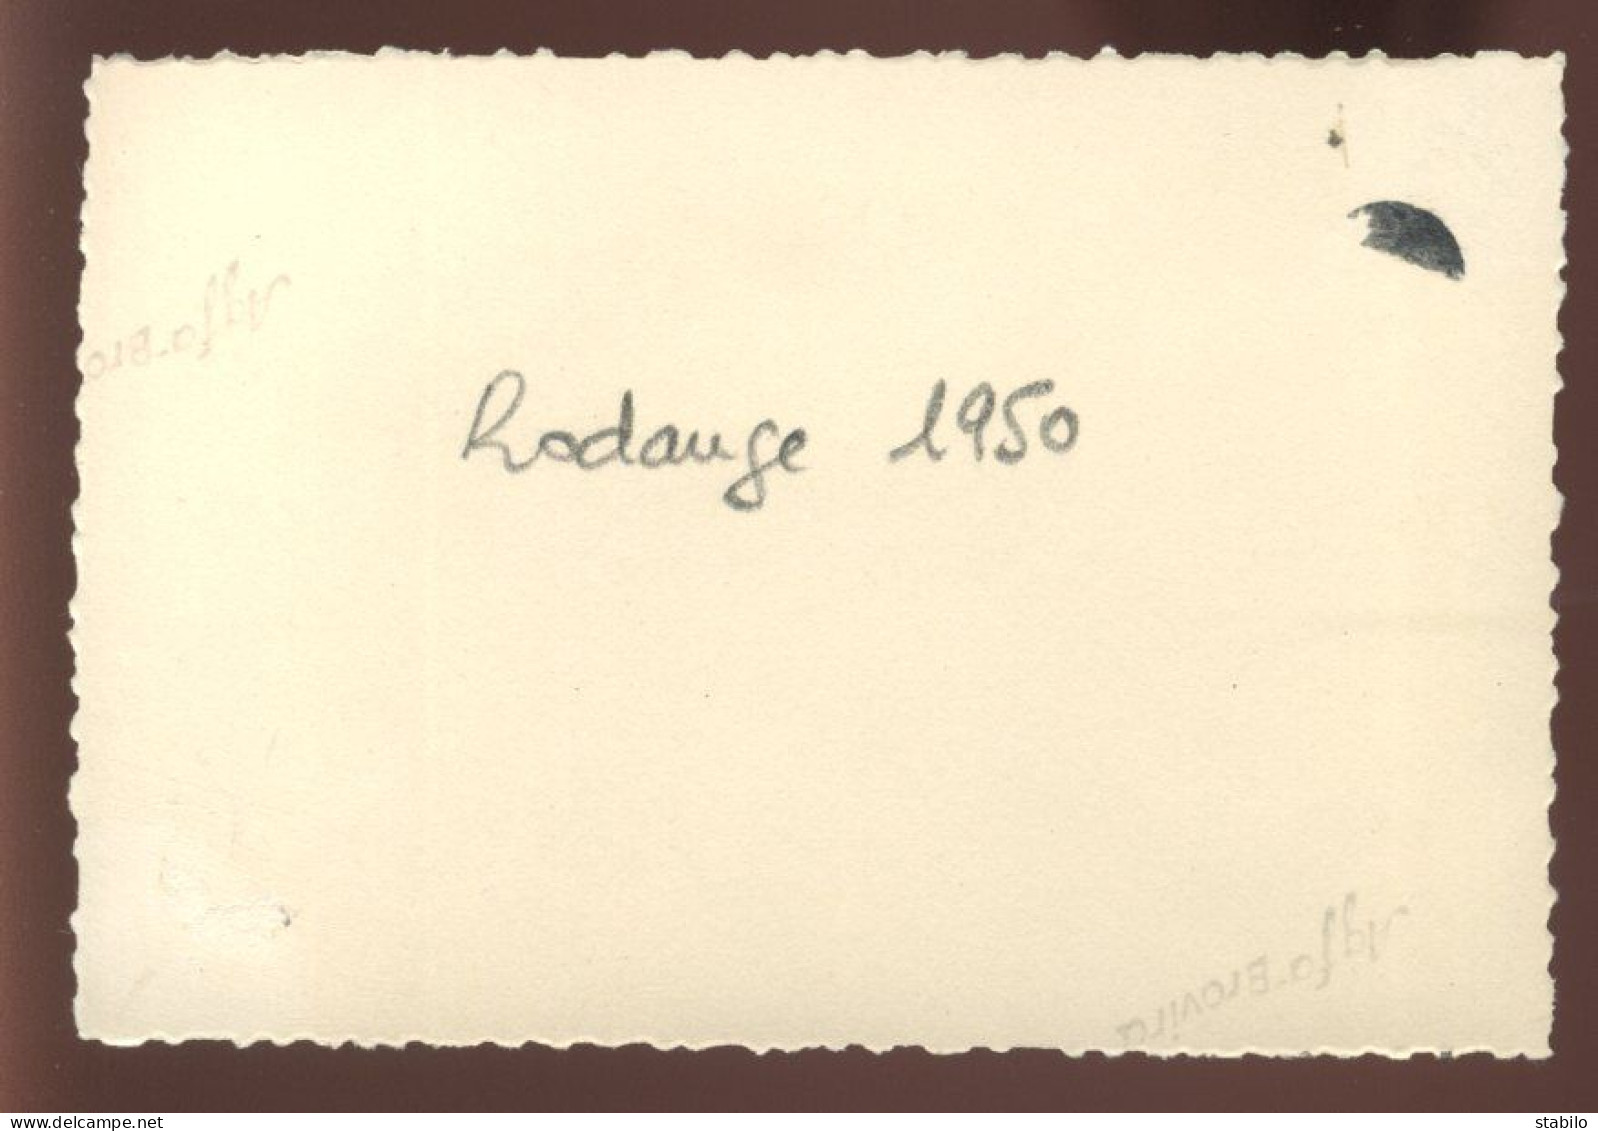 LUXEMBOURG - RODANGE - 1950 - FORMAT 10.5 X 7 CM - Lugares